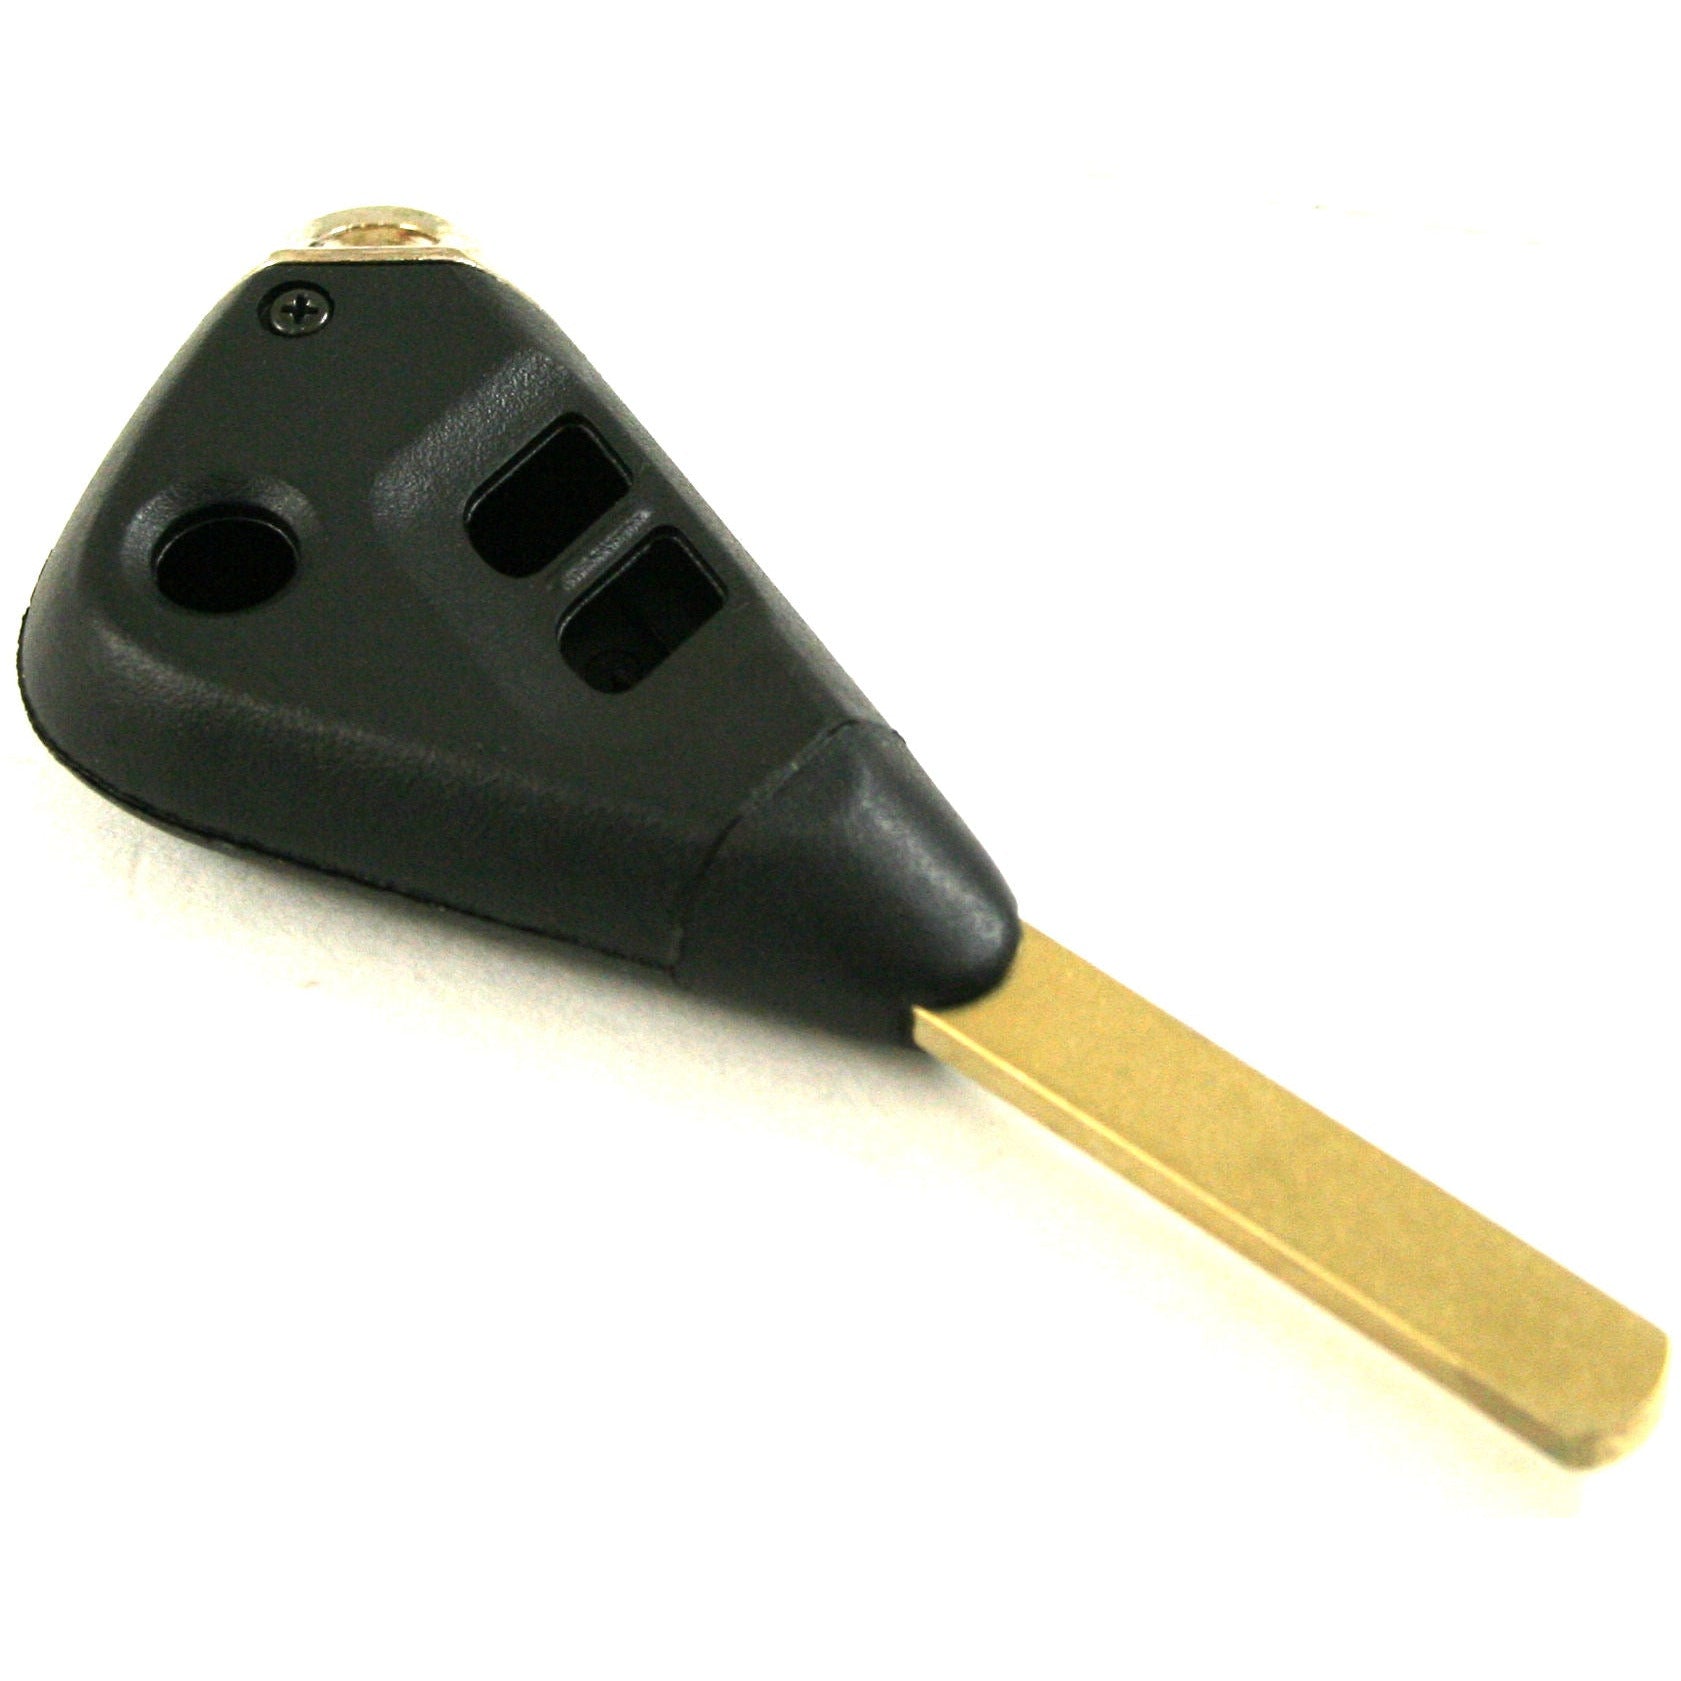 MAP Remote Shell & Key - [Suit 3 Button] - KF381